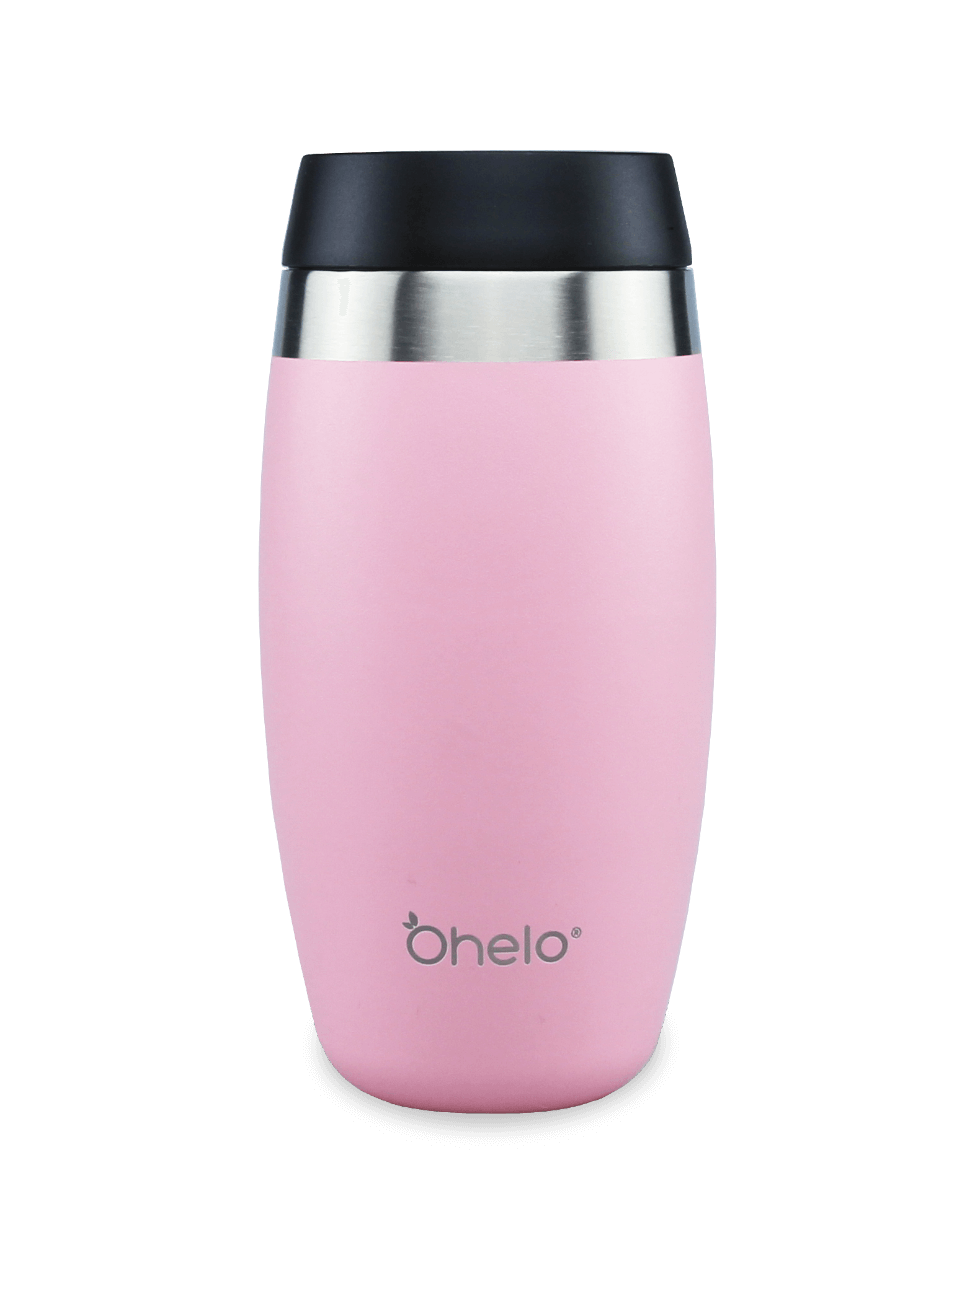 Ohelo 400ml pink insulated reusable coffee cup